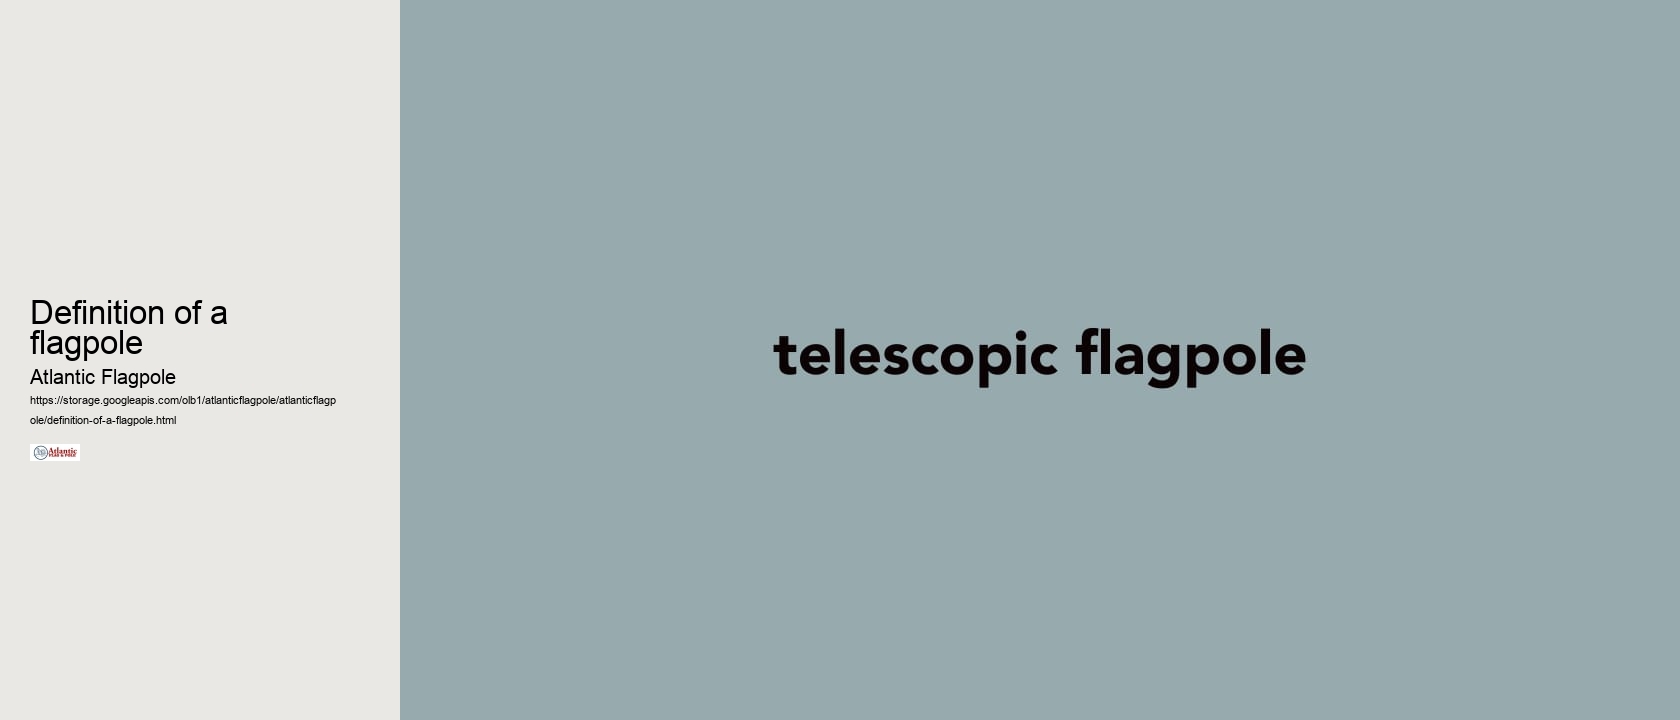 Definition of a flagpole